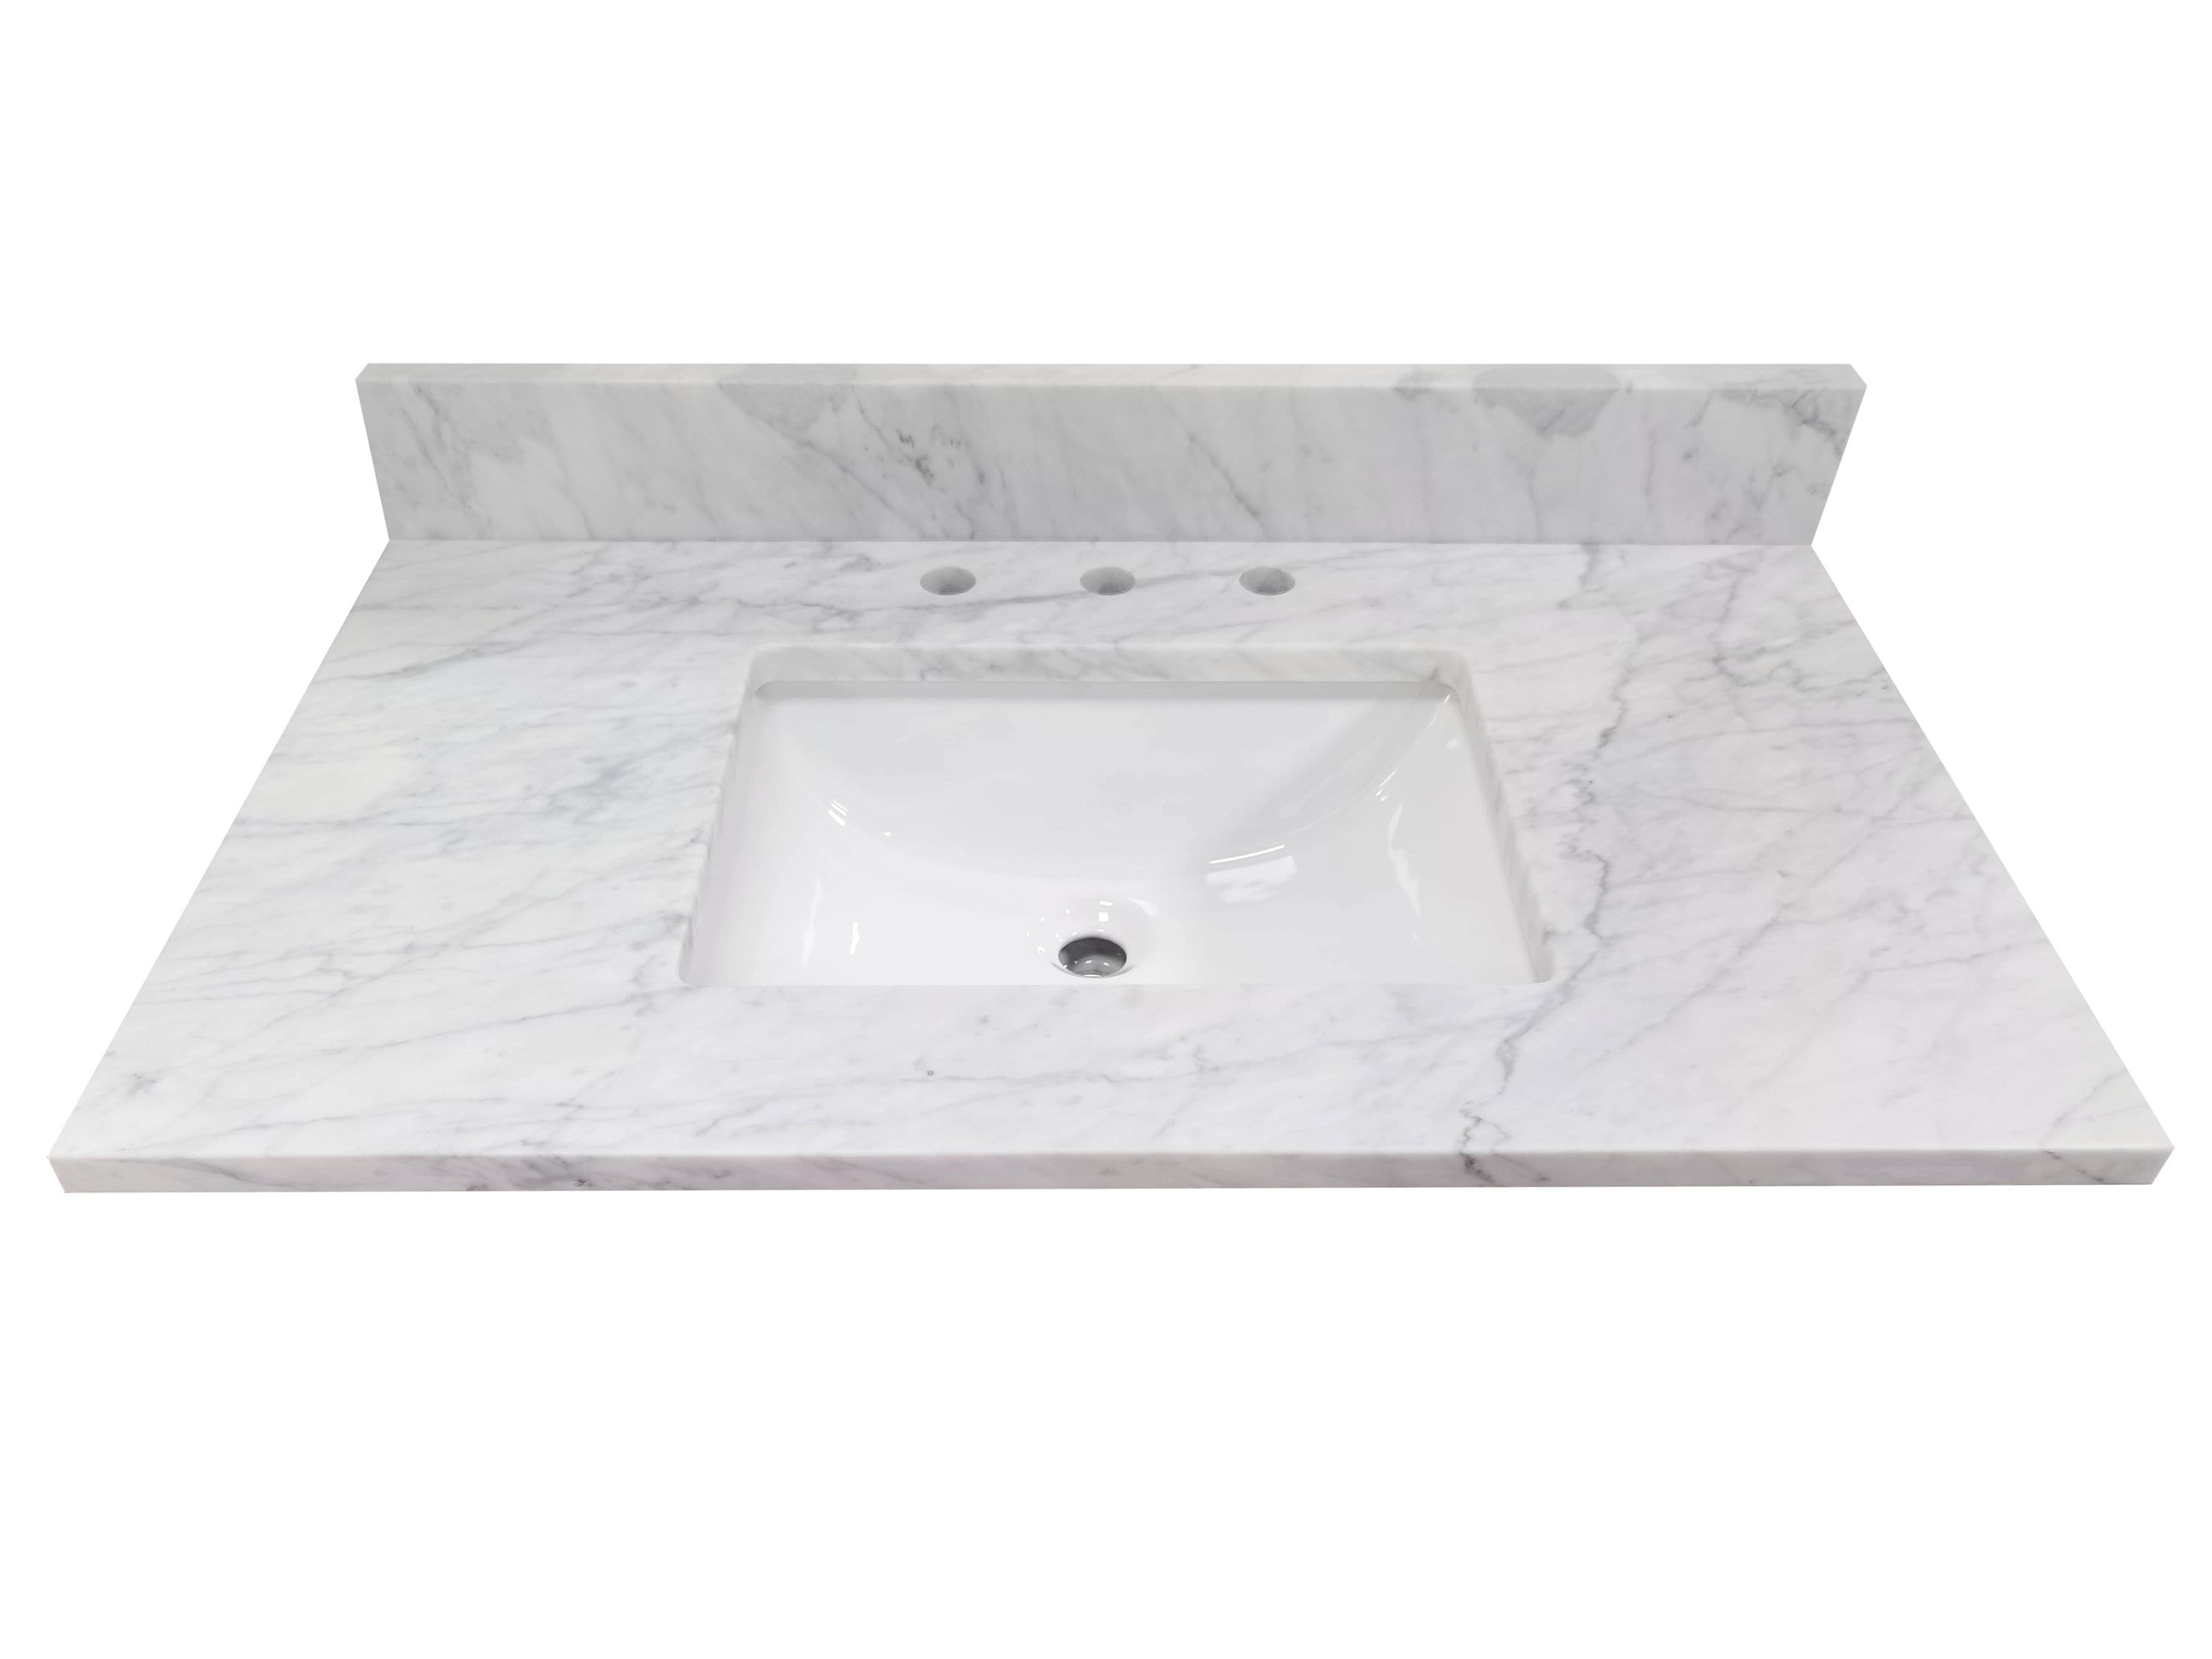 allen roth Natural Carrara marble 37-in White Natural Marble Undermount Single Sink 3-Hole Bathroom Vanity Top in the Bathroom Vanity Tops department at Lowes.com